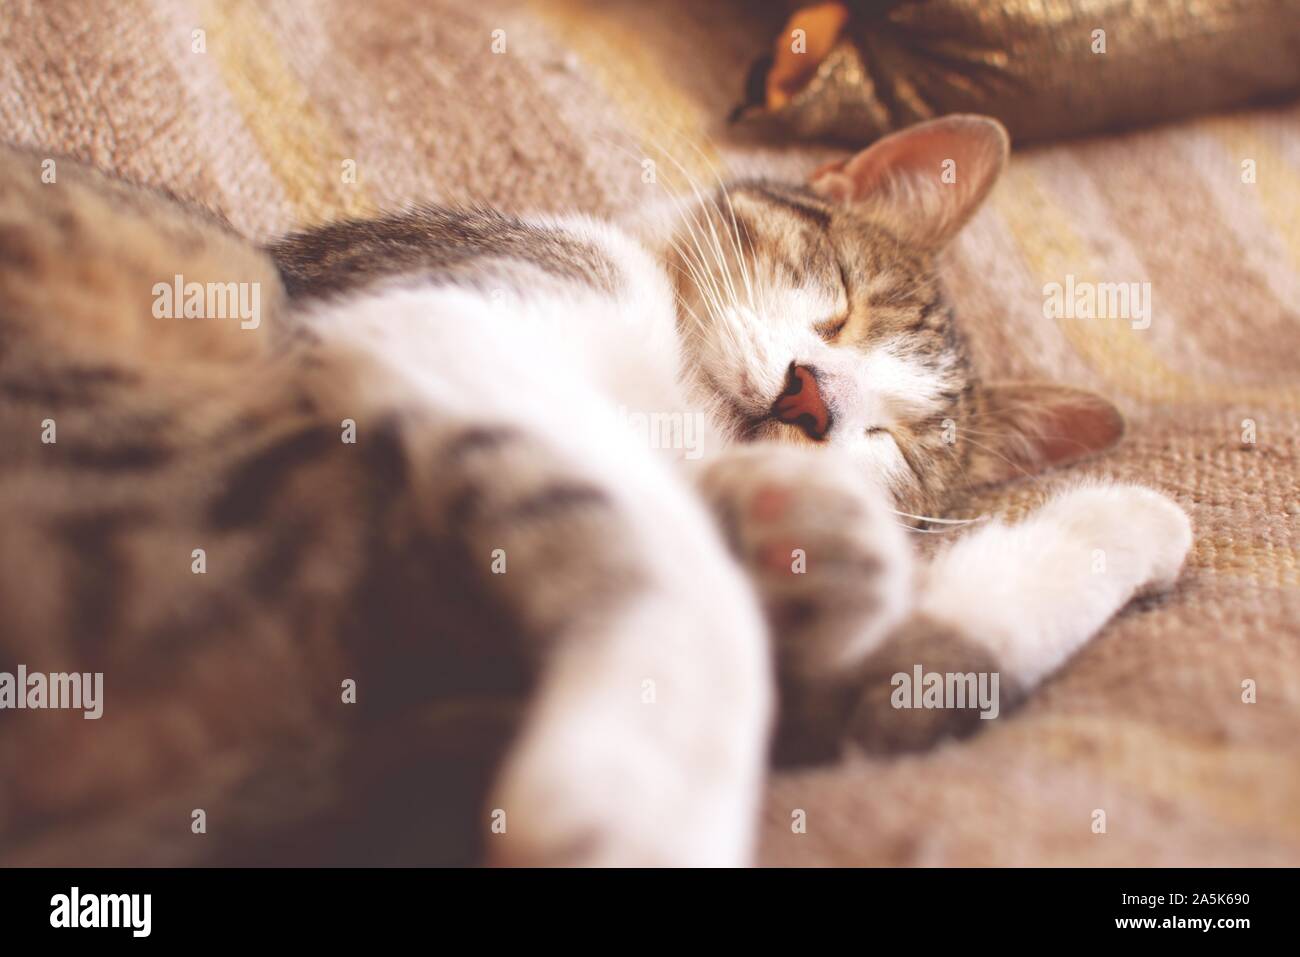 Tabby cat sleeping on bed. Worm's eye, low angle view. Stock Photo